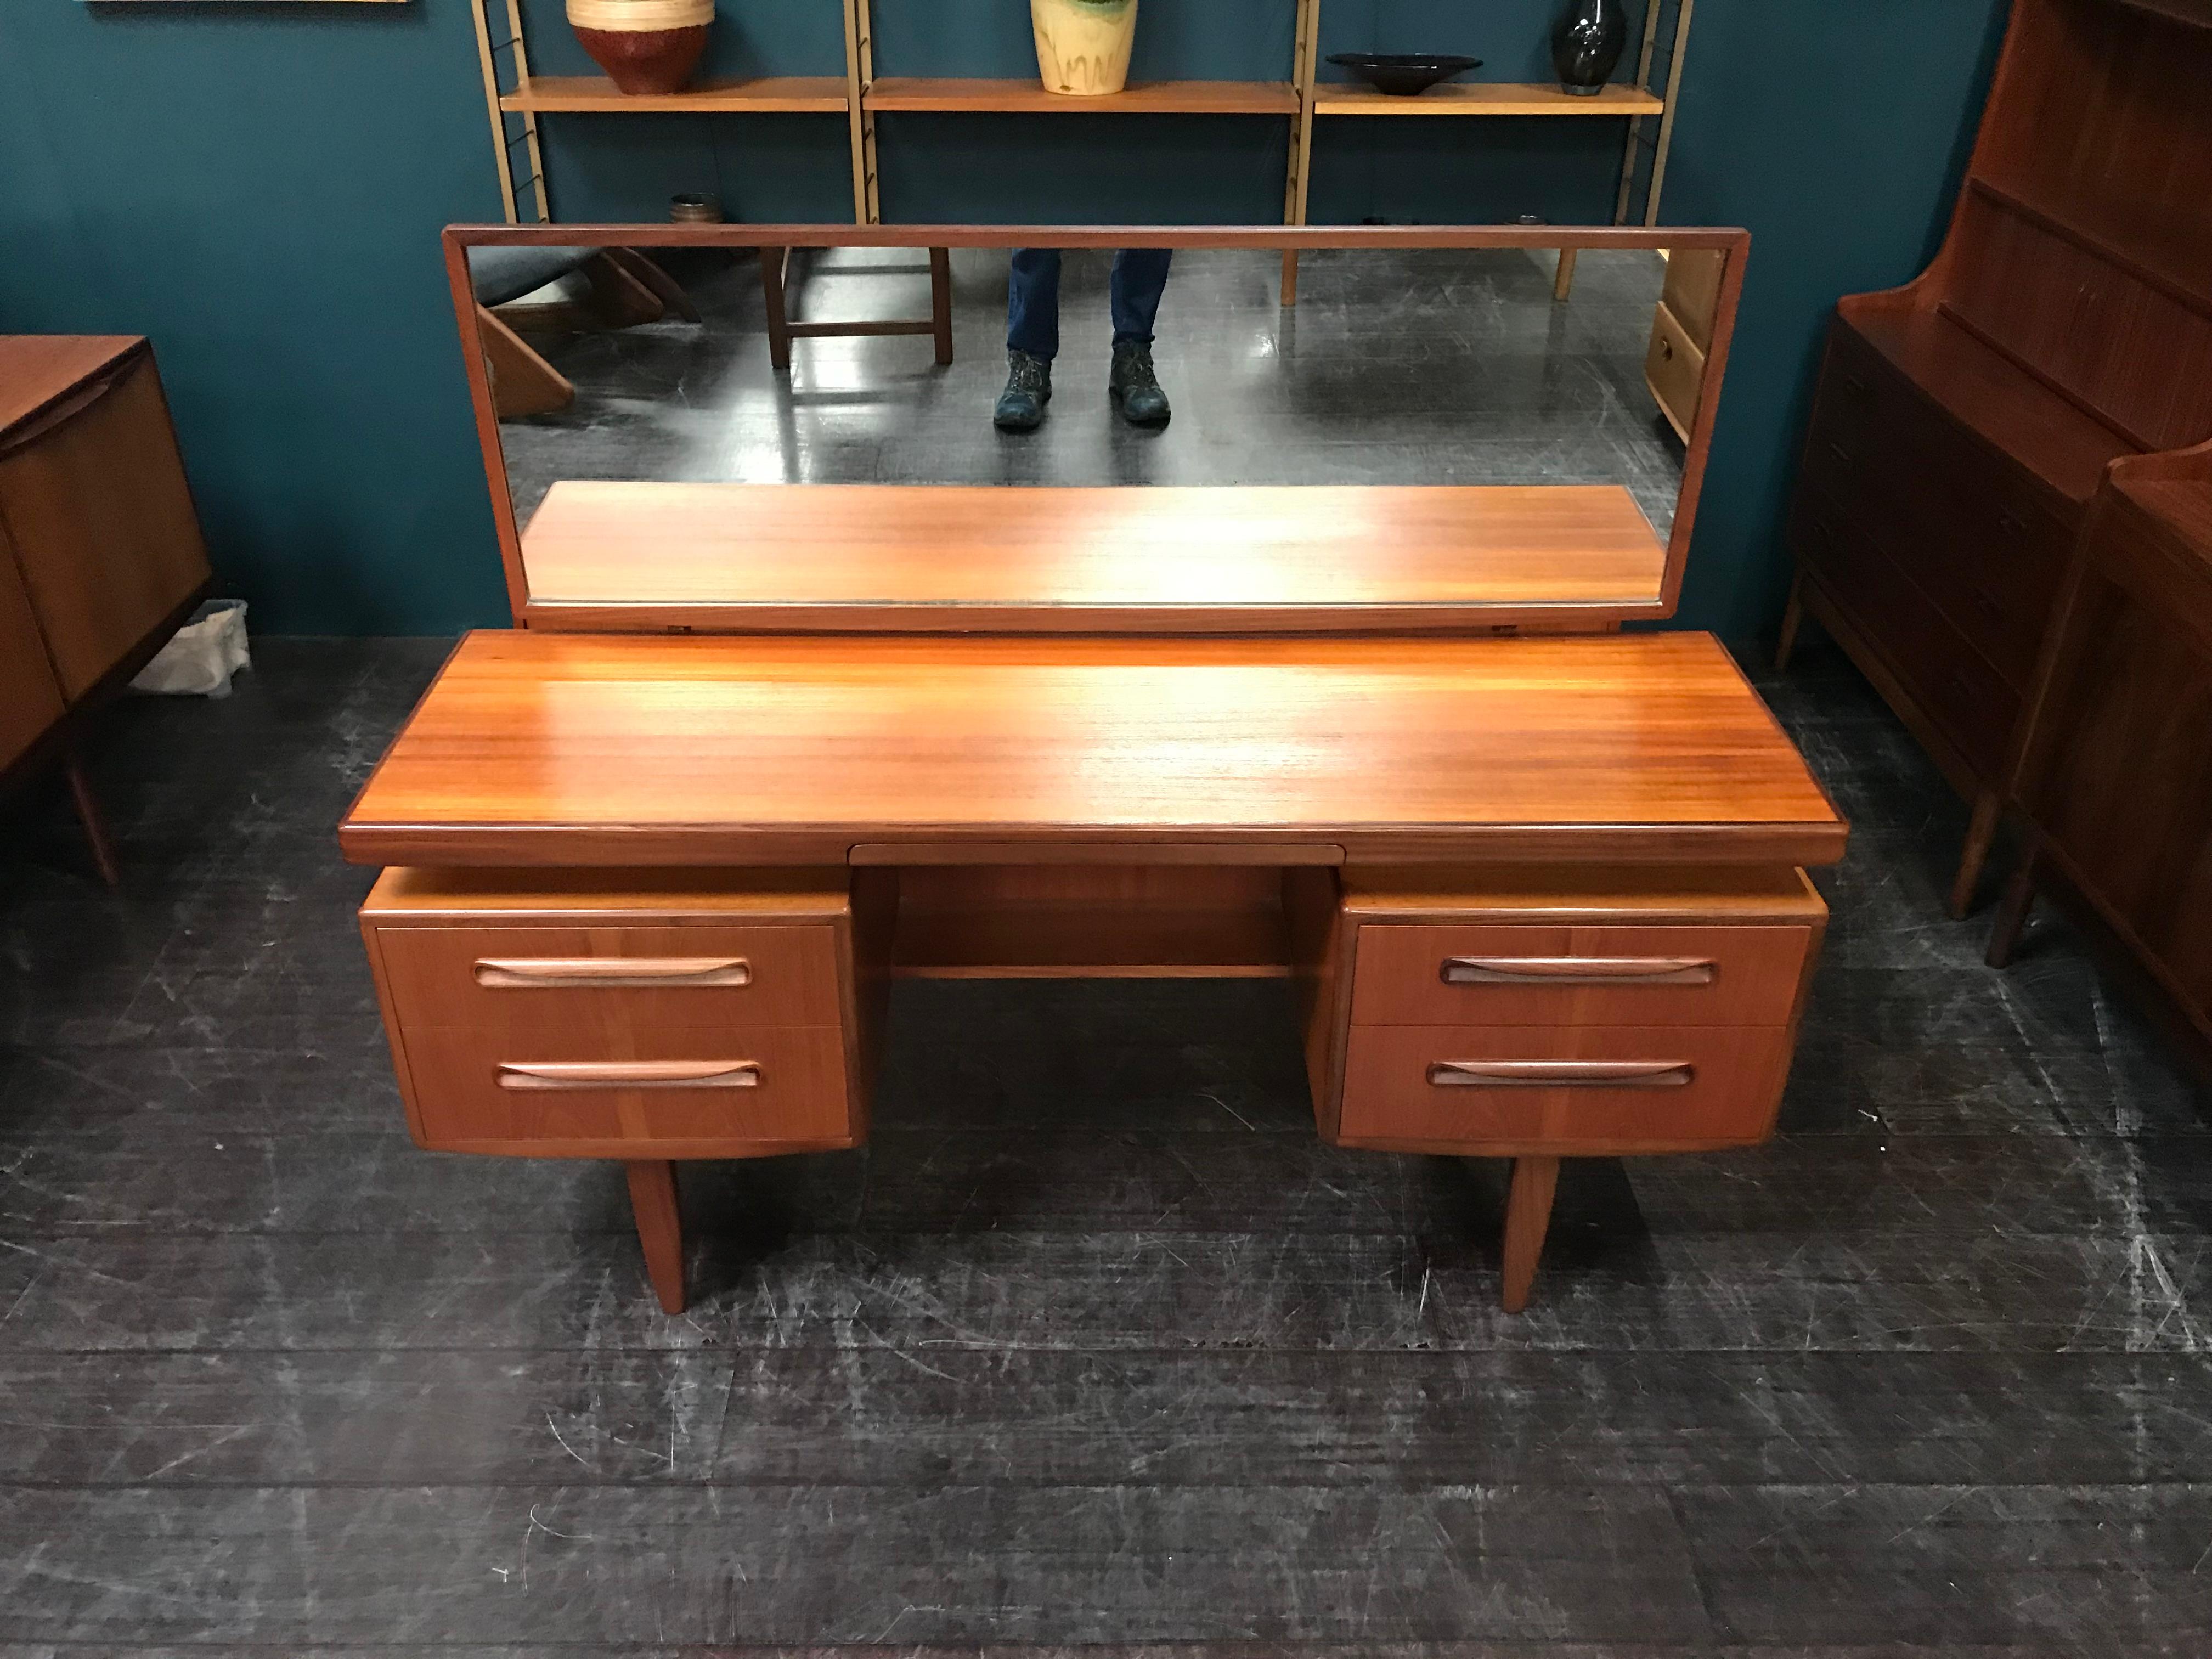 This vintage Fresco range floating dressing table features a slim and organic shape and offers storage possibilities with two double sets of drawers. There is also a cute little ‘secret’ drawer seamlessly built in to the table top and lined with